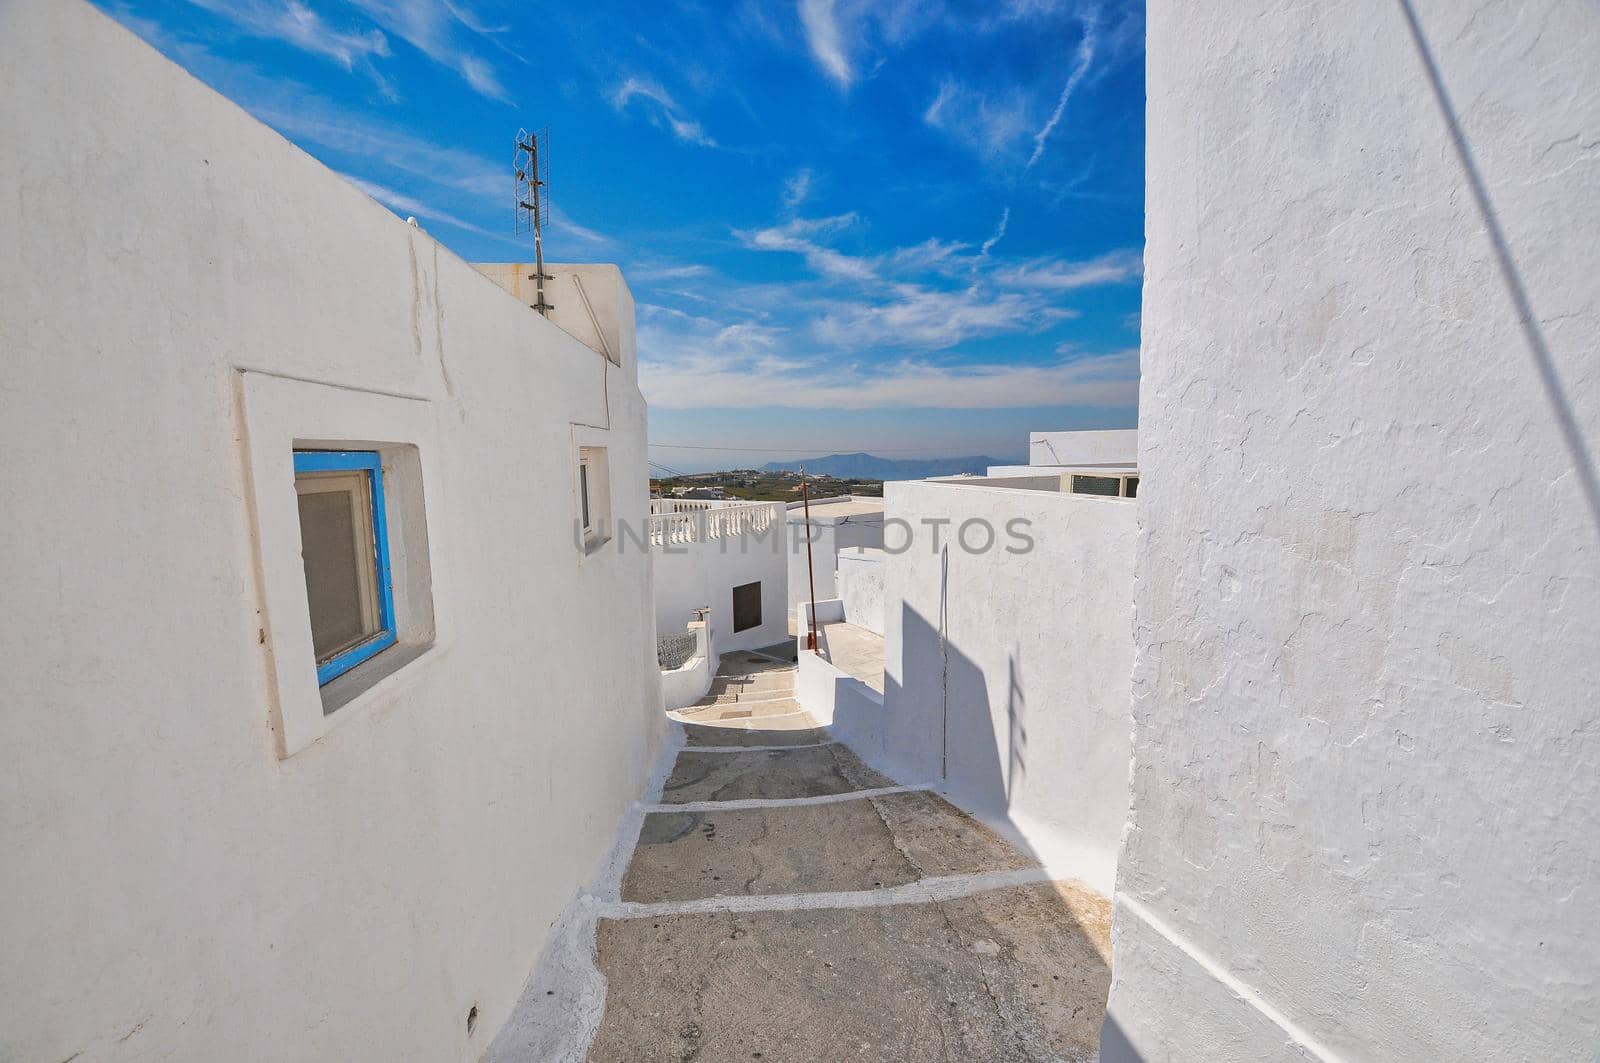 Pyrgos, Santorini, Greece. Famous attraction of white village with cobbled streets, Greek Cyclades Islands, Aegean Sea.